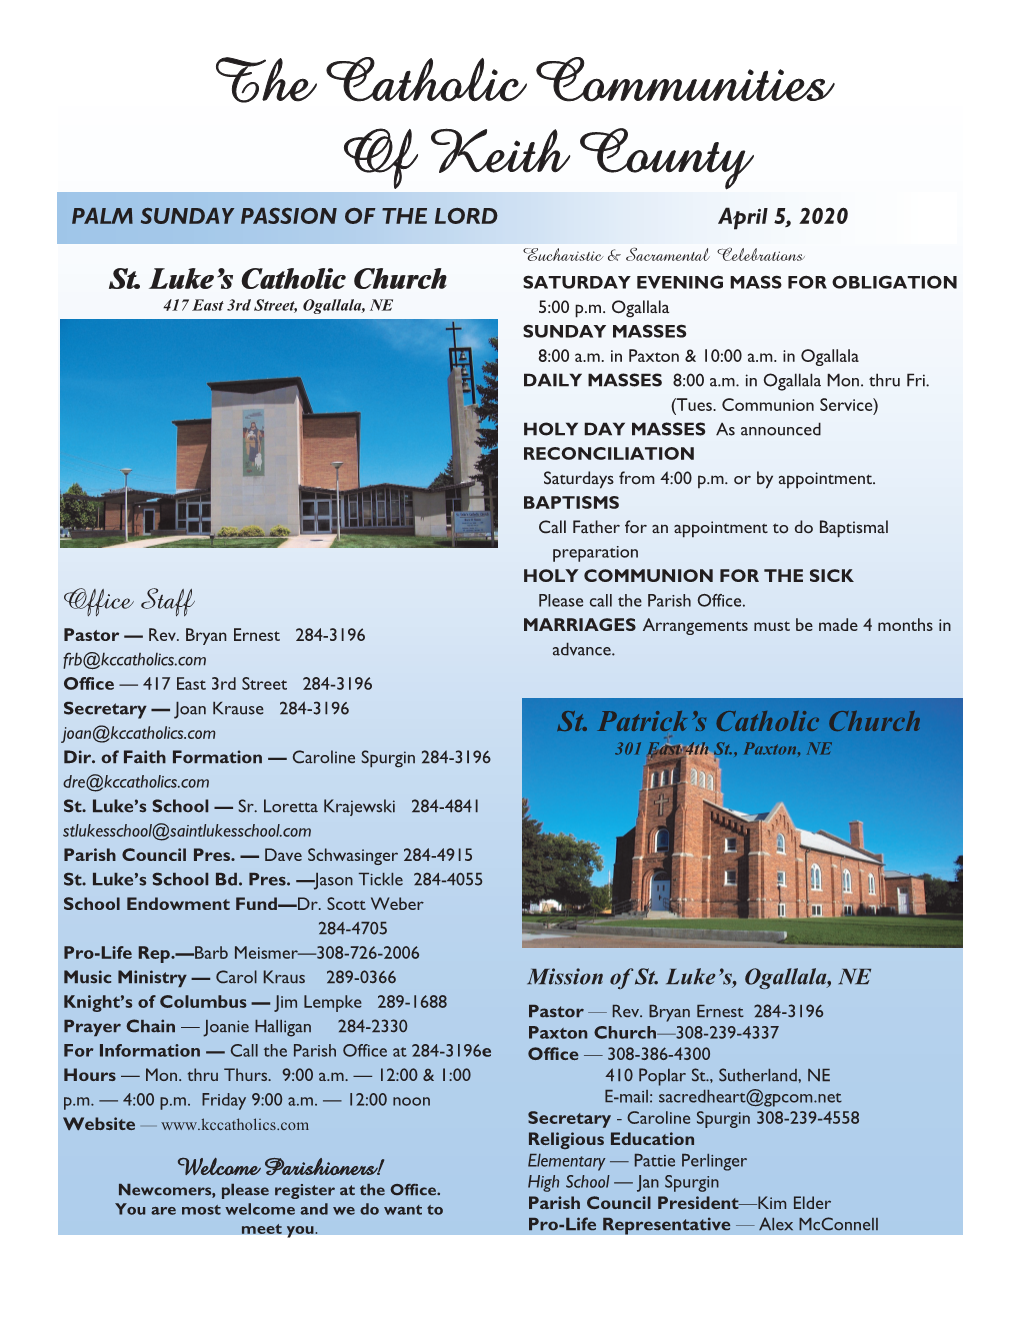 The Catholic Communities of Keith County PALM SUNDAY PASSION of the LORD April 5, 2020